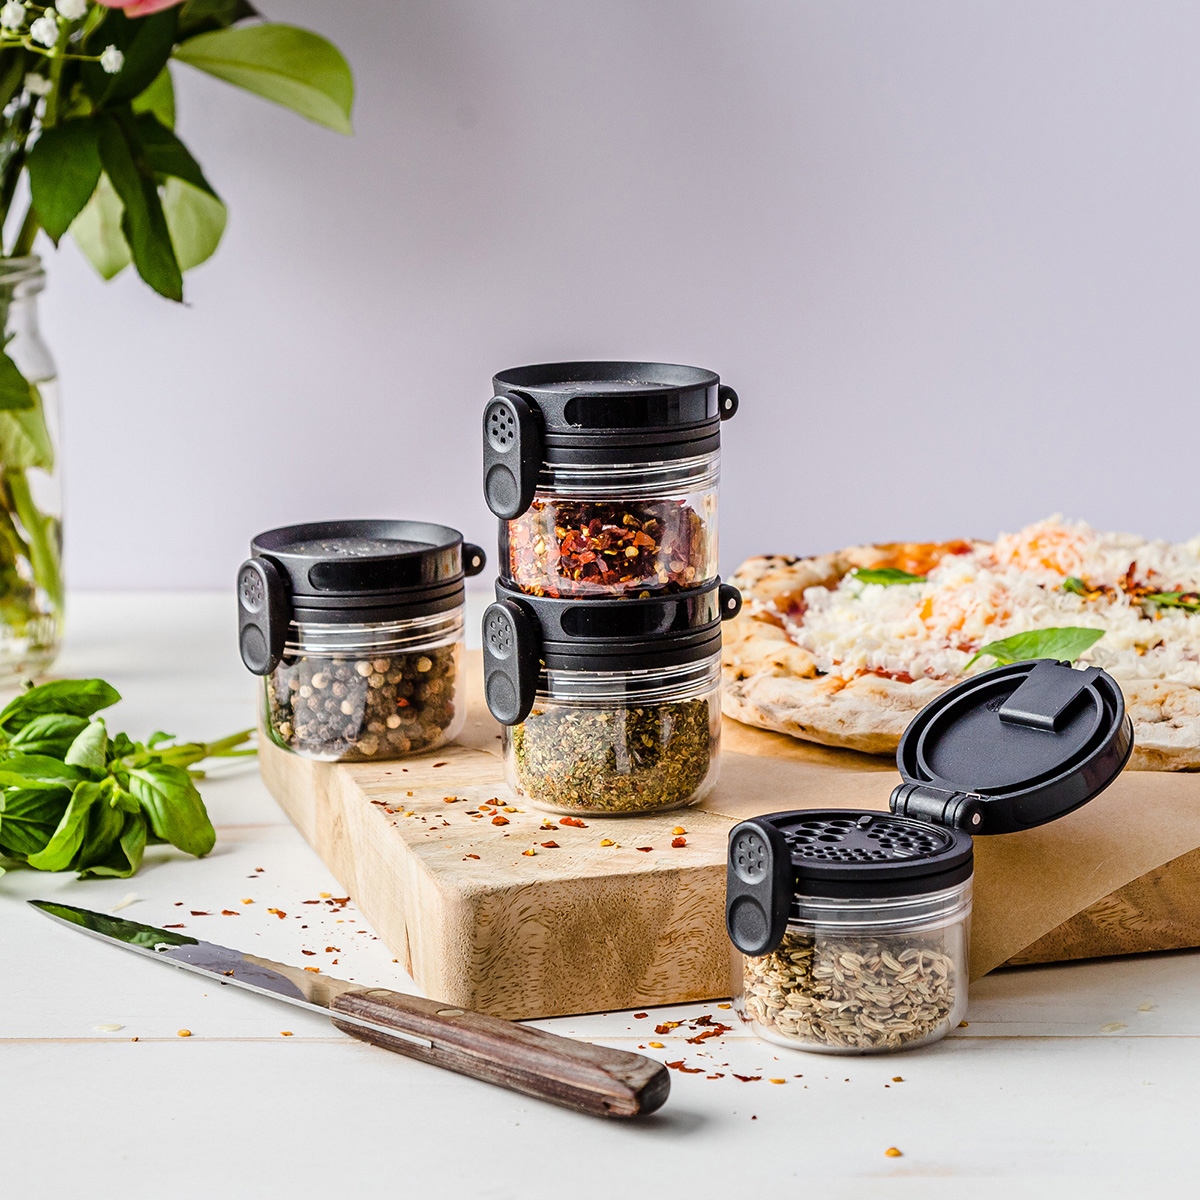 Orlid is the spice jar compatible with Ortwo.
⁠#farmhousespitsandspoons #yummy #delicious #mindfulness #lifestyle #supportlocalbusinesses #cooking #homemade #peppershaker #spicejar #spicestorage #storagesolution #kitchenstorage #declutter #storage #kitchengadgets #kitchenware